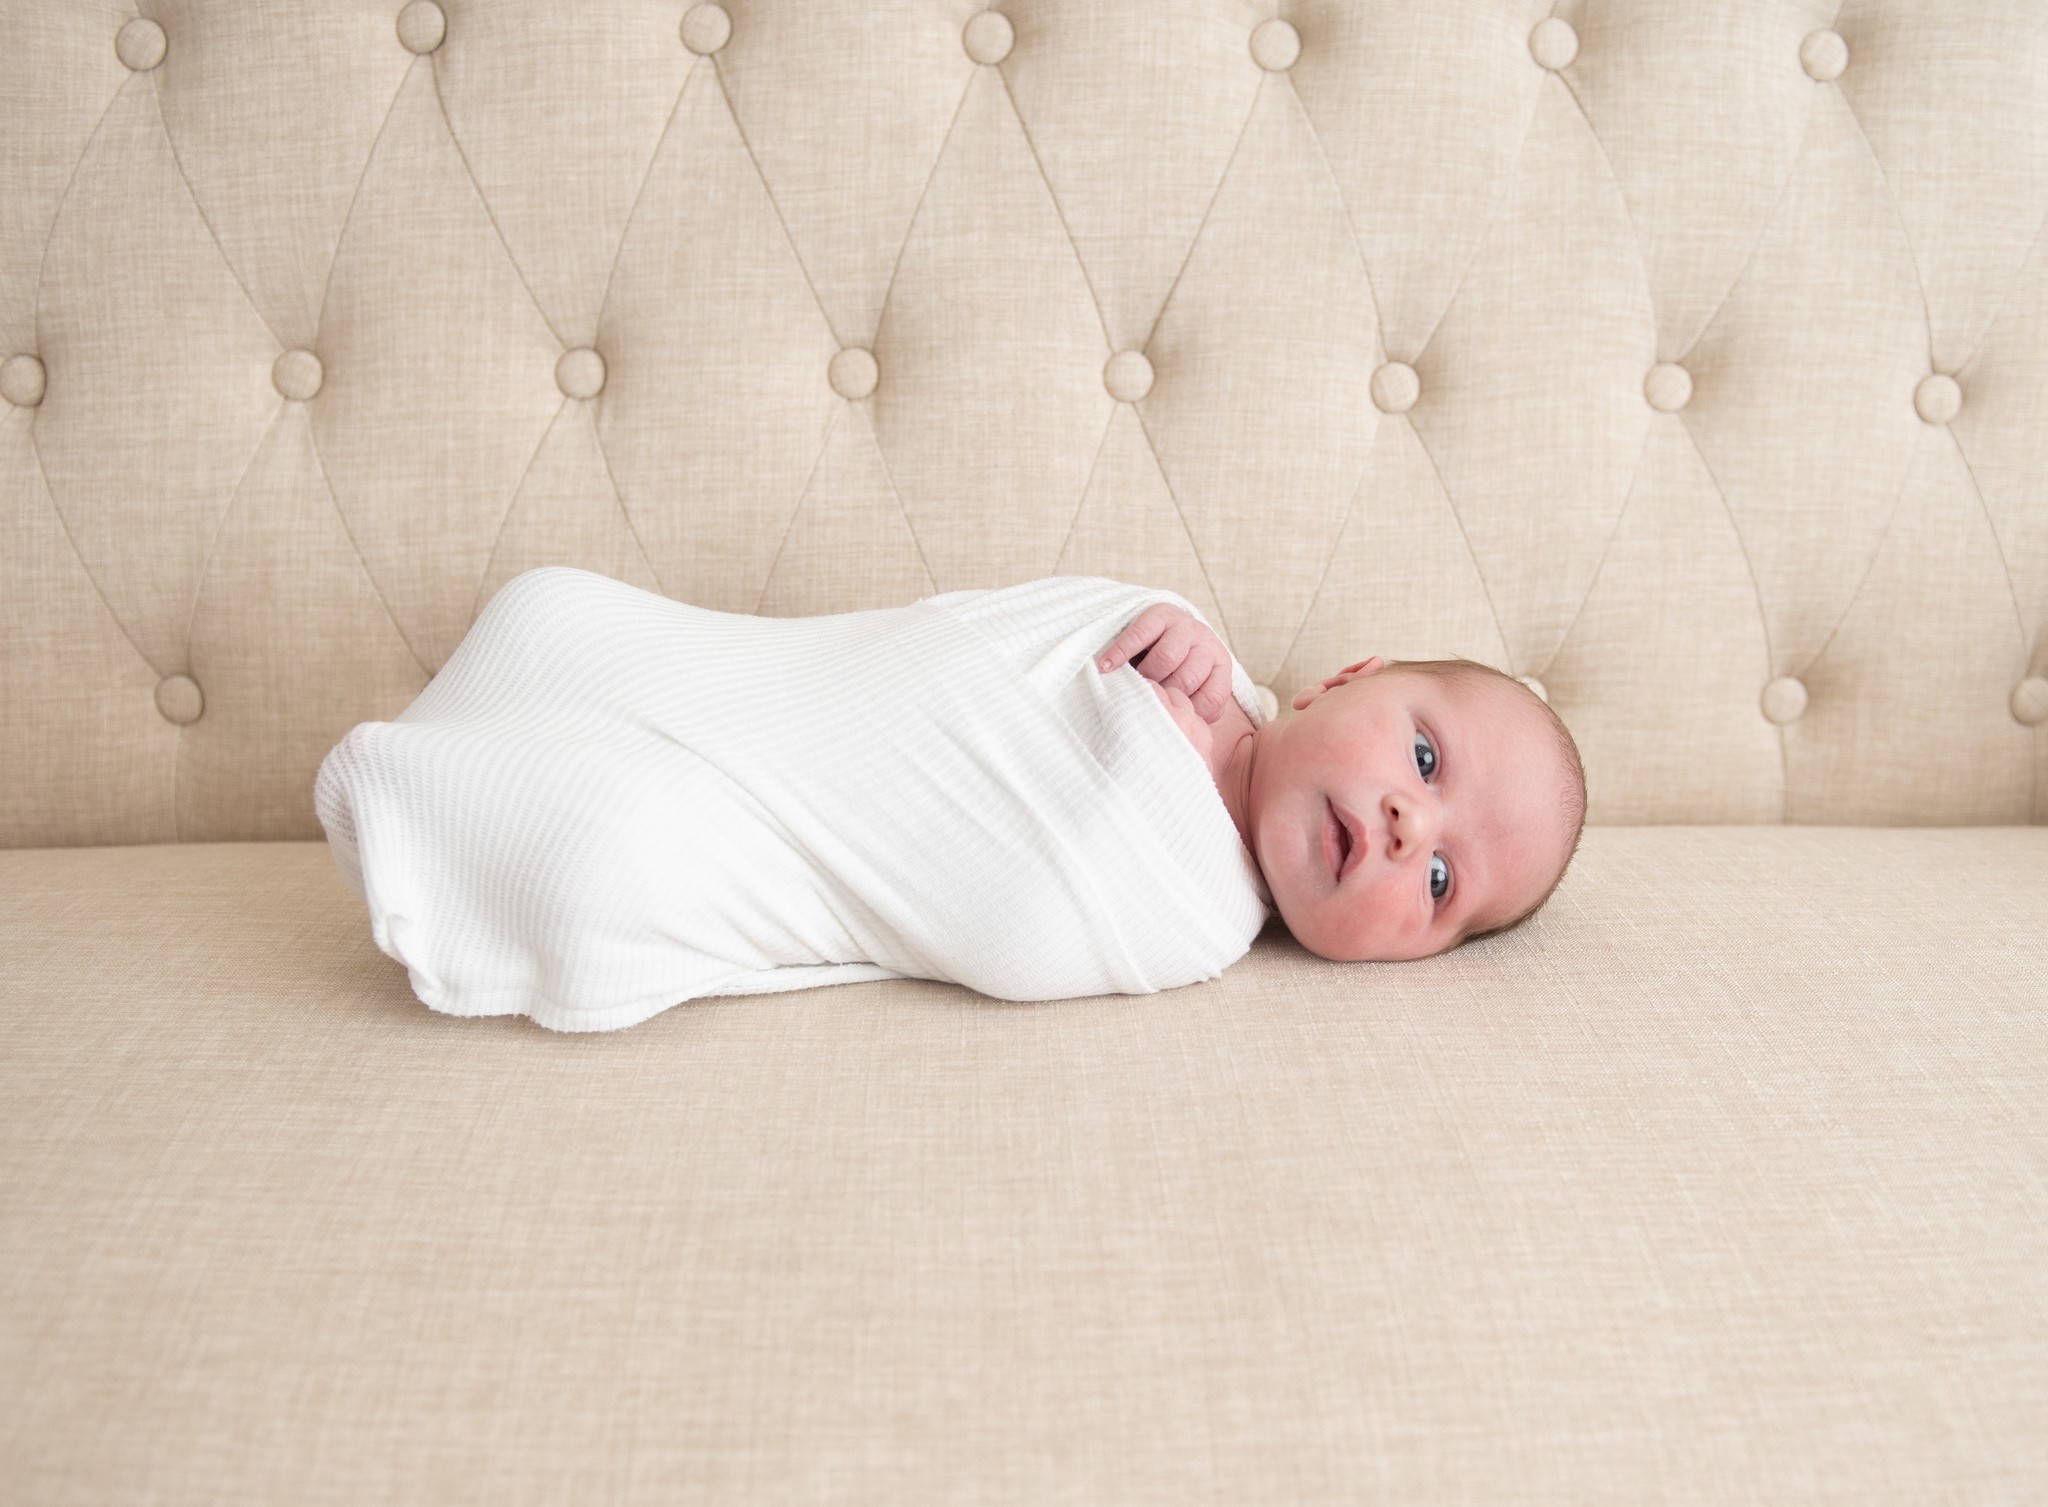 A newborn baby lays on a bench in a white swaddle with eyes open the blue beret